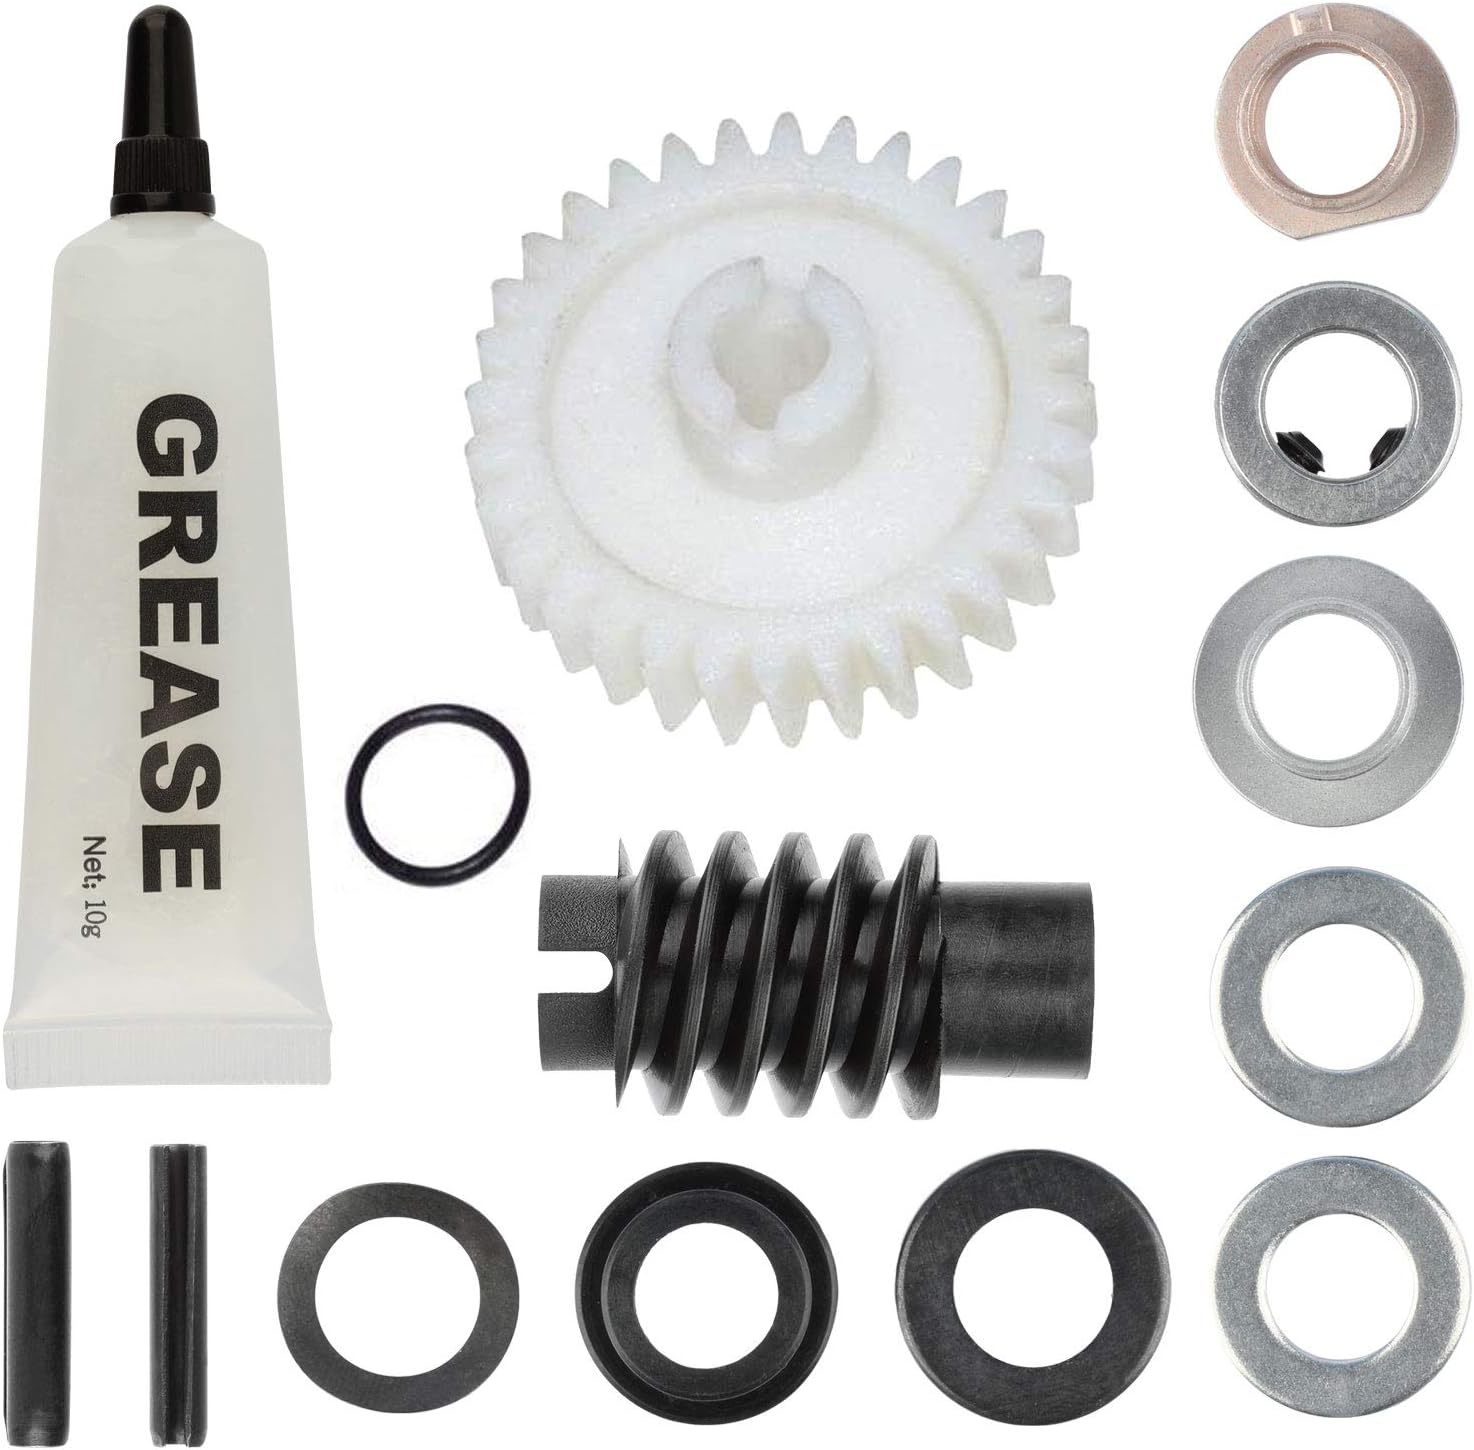 TCK TECH Replacement for Liftmaster 41c4220a Gear and Sprocket Kit fits Chamberlain, Sears, Craftsman 1/3 and 1/2 HP Chain Drive Models